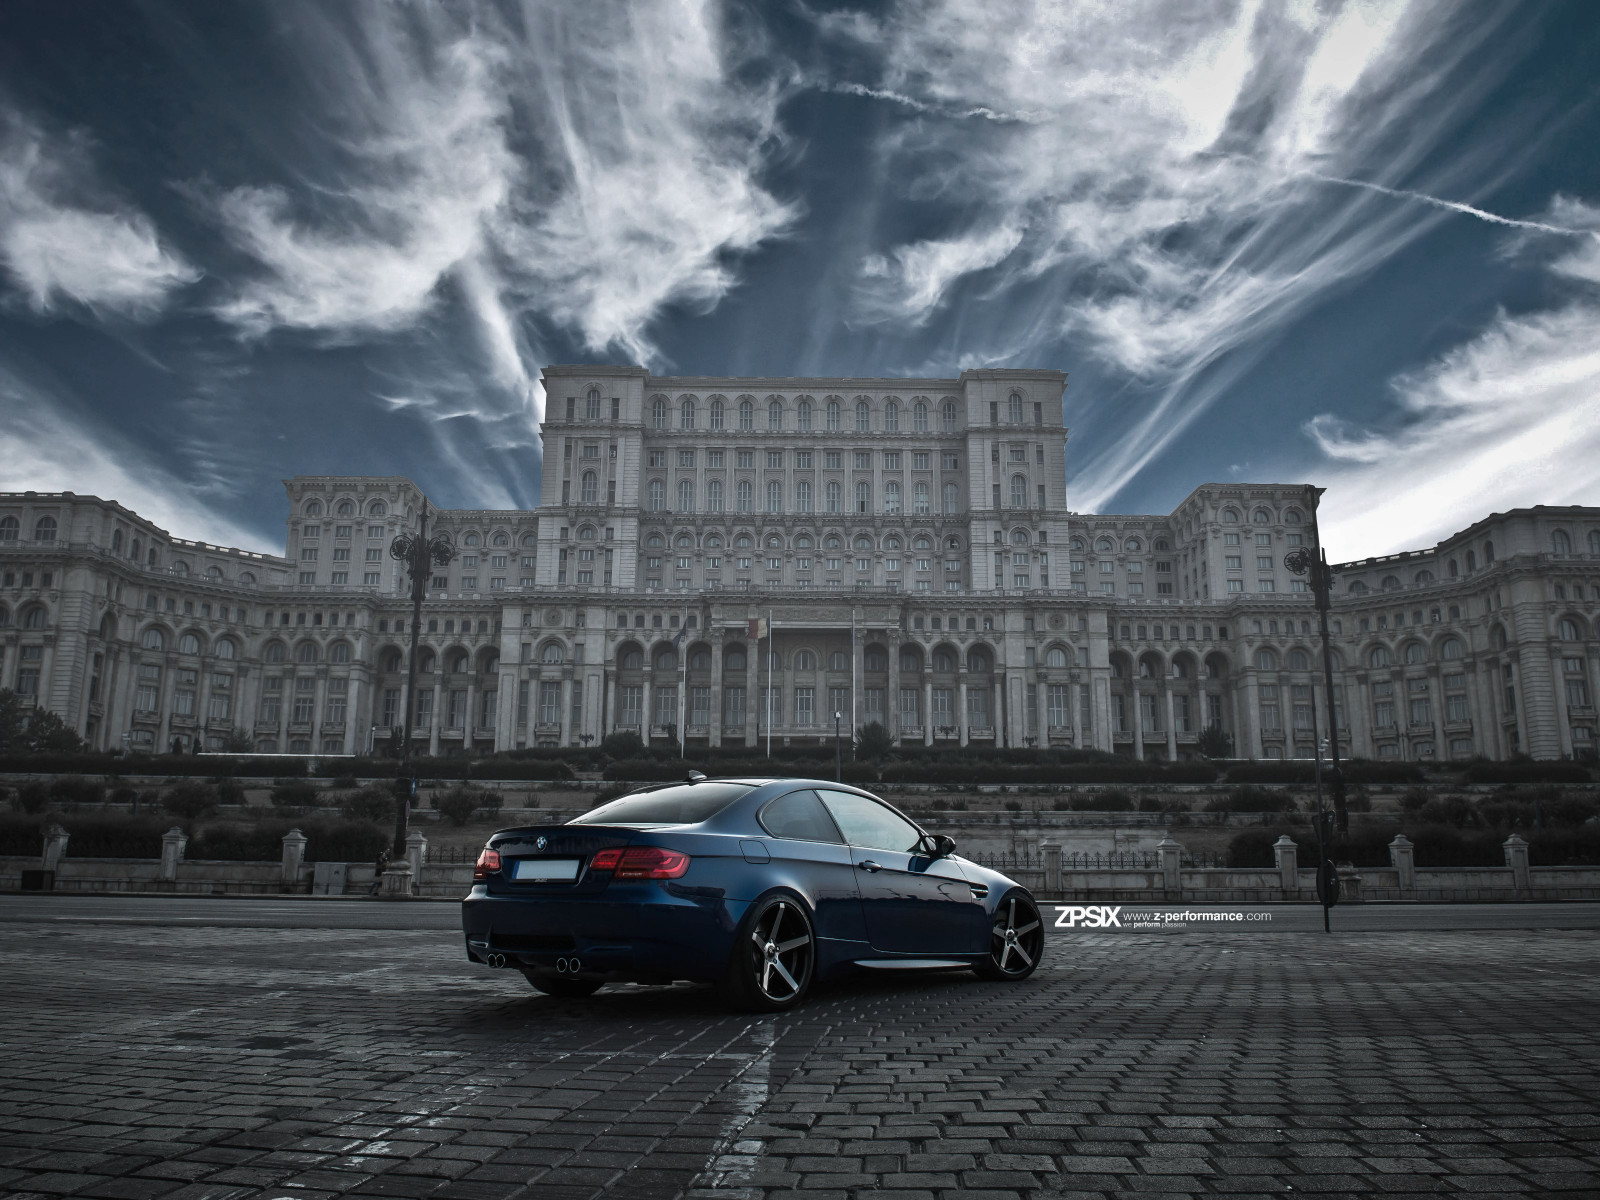 BMW E92 M3 in front of Palace of the Parliament wallpaper 1600x1200